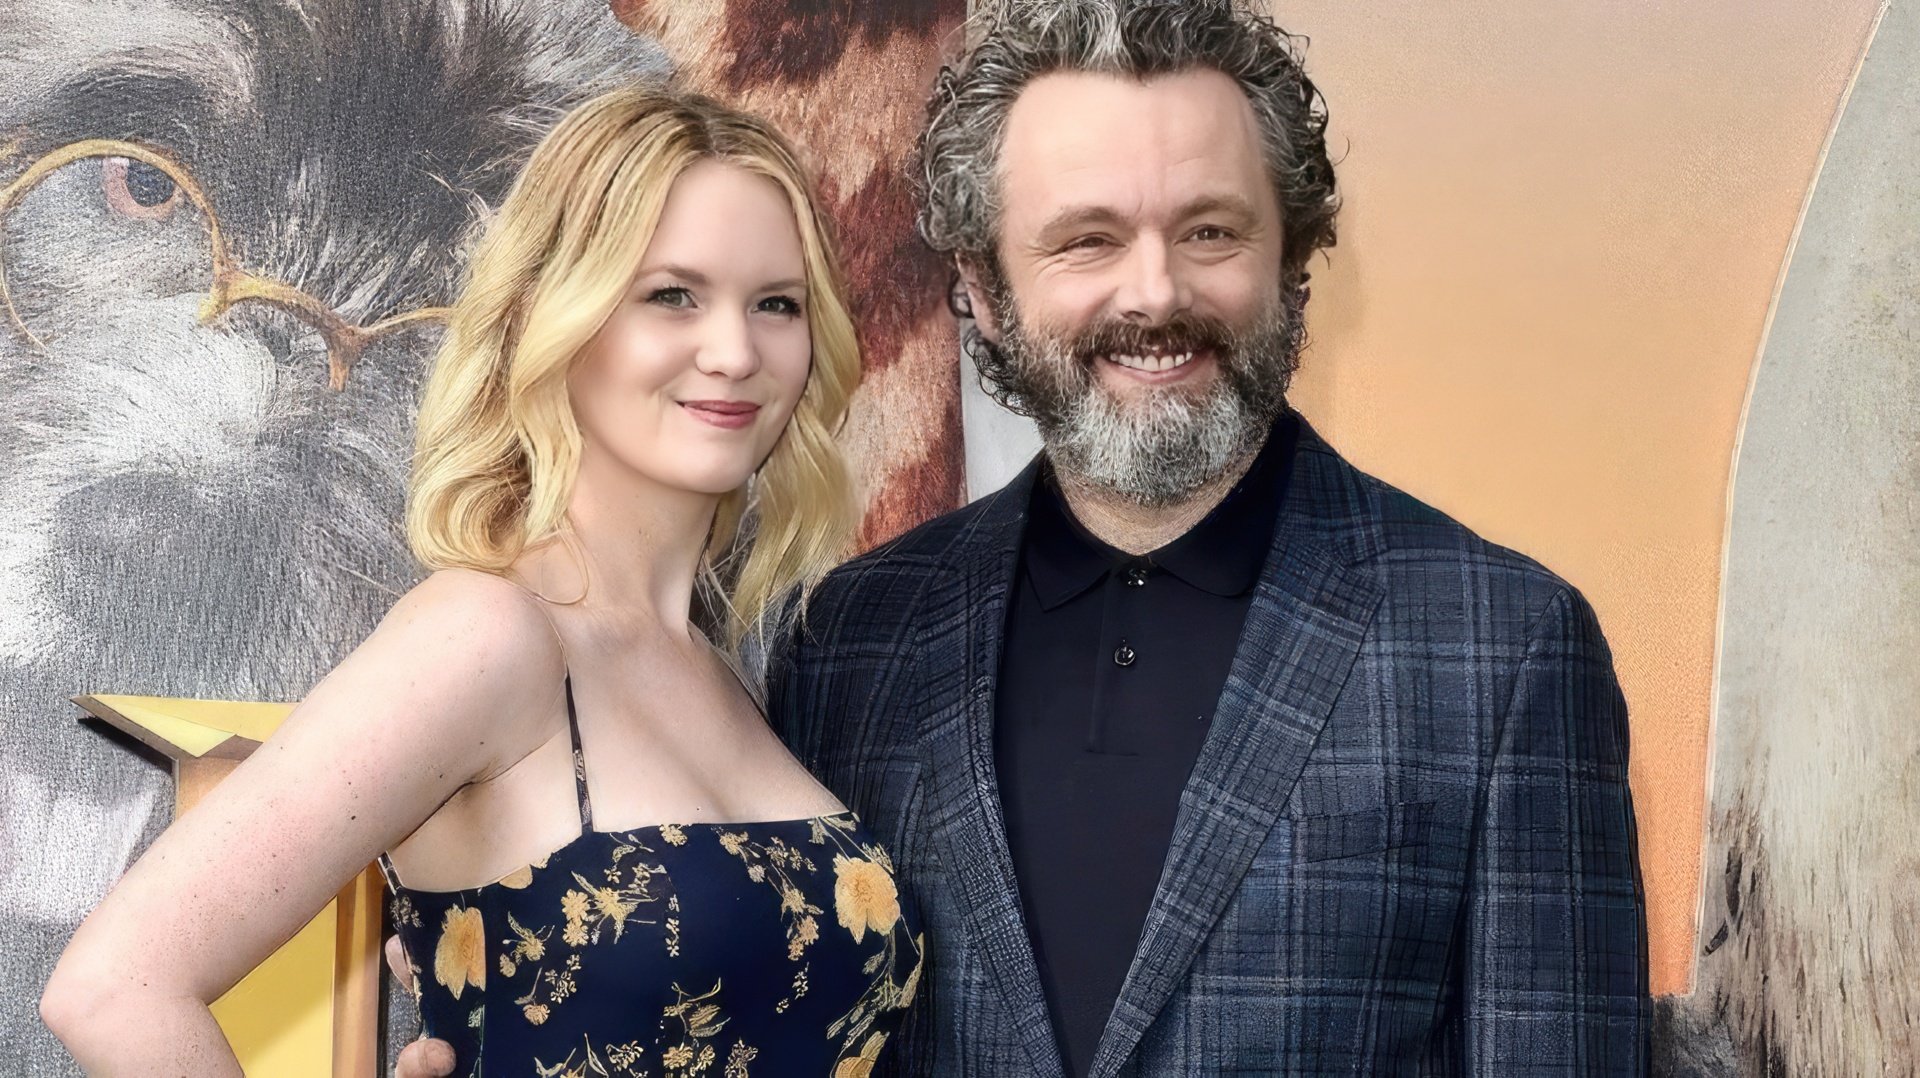 Anna Lundberg is 26 years younger than Michael Sheen